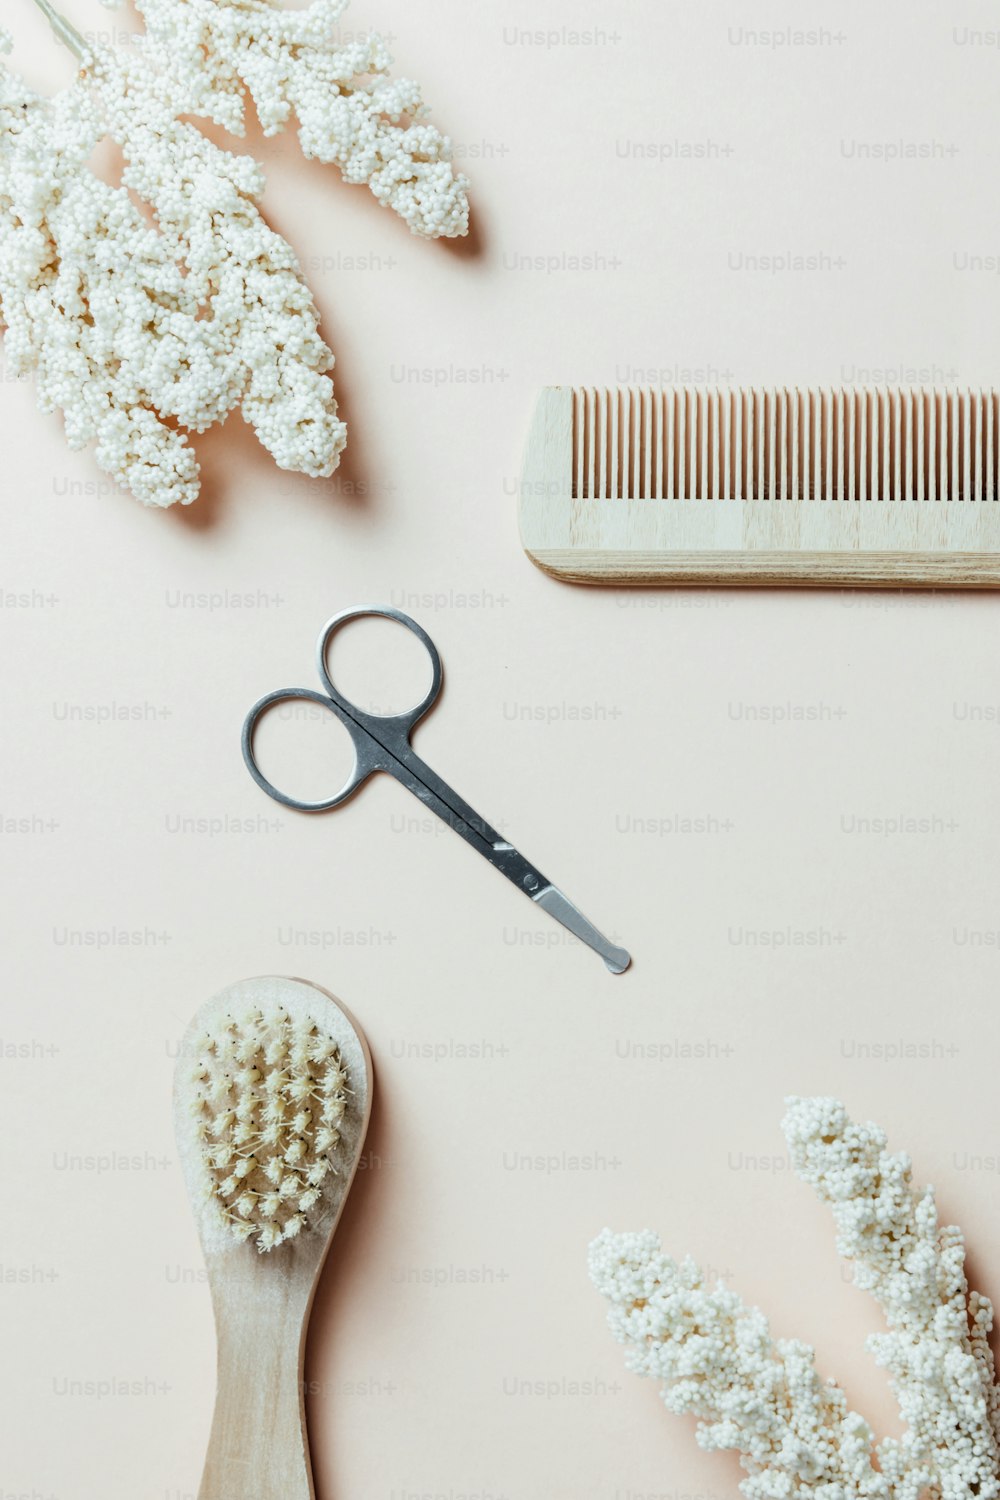 a pair of scissors, a comb, and pearls on a pink surface